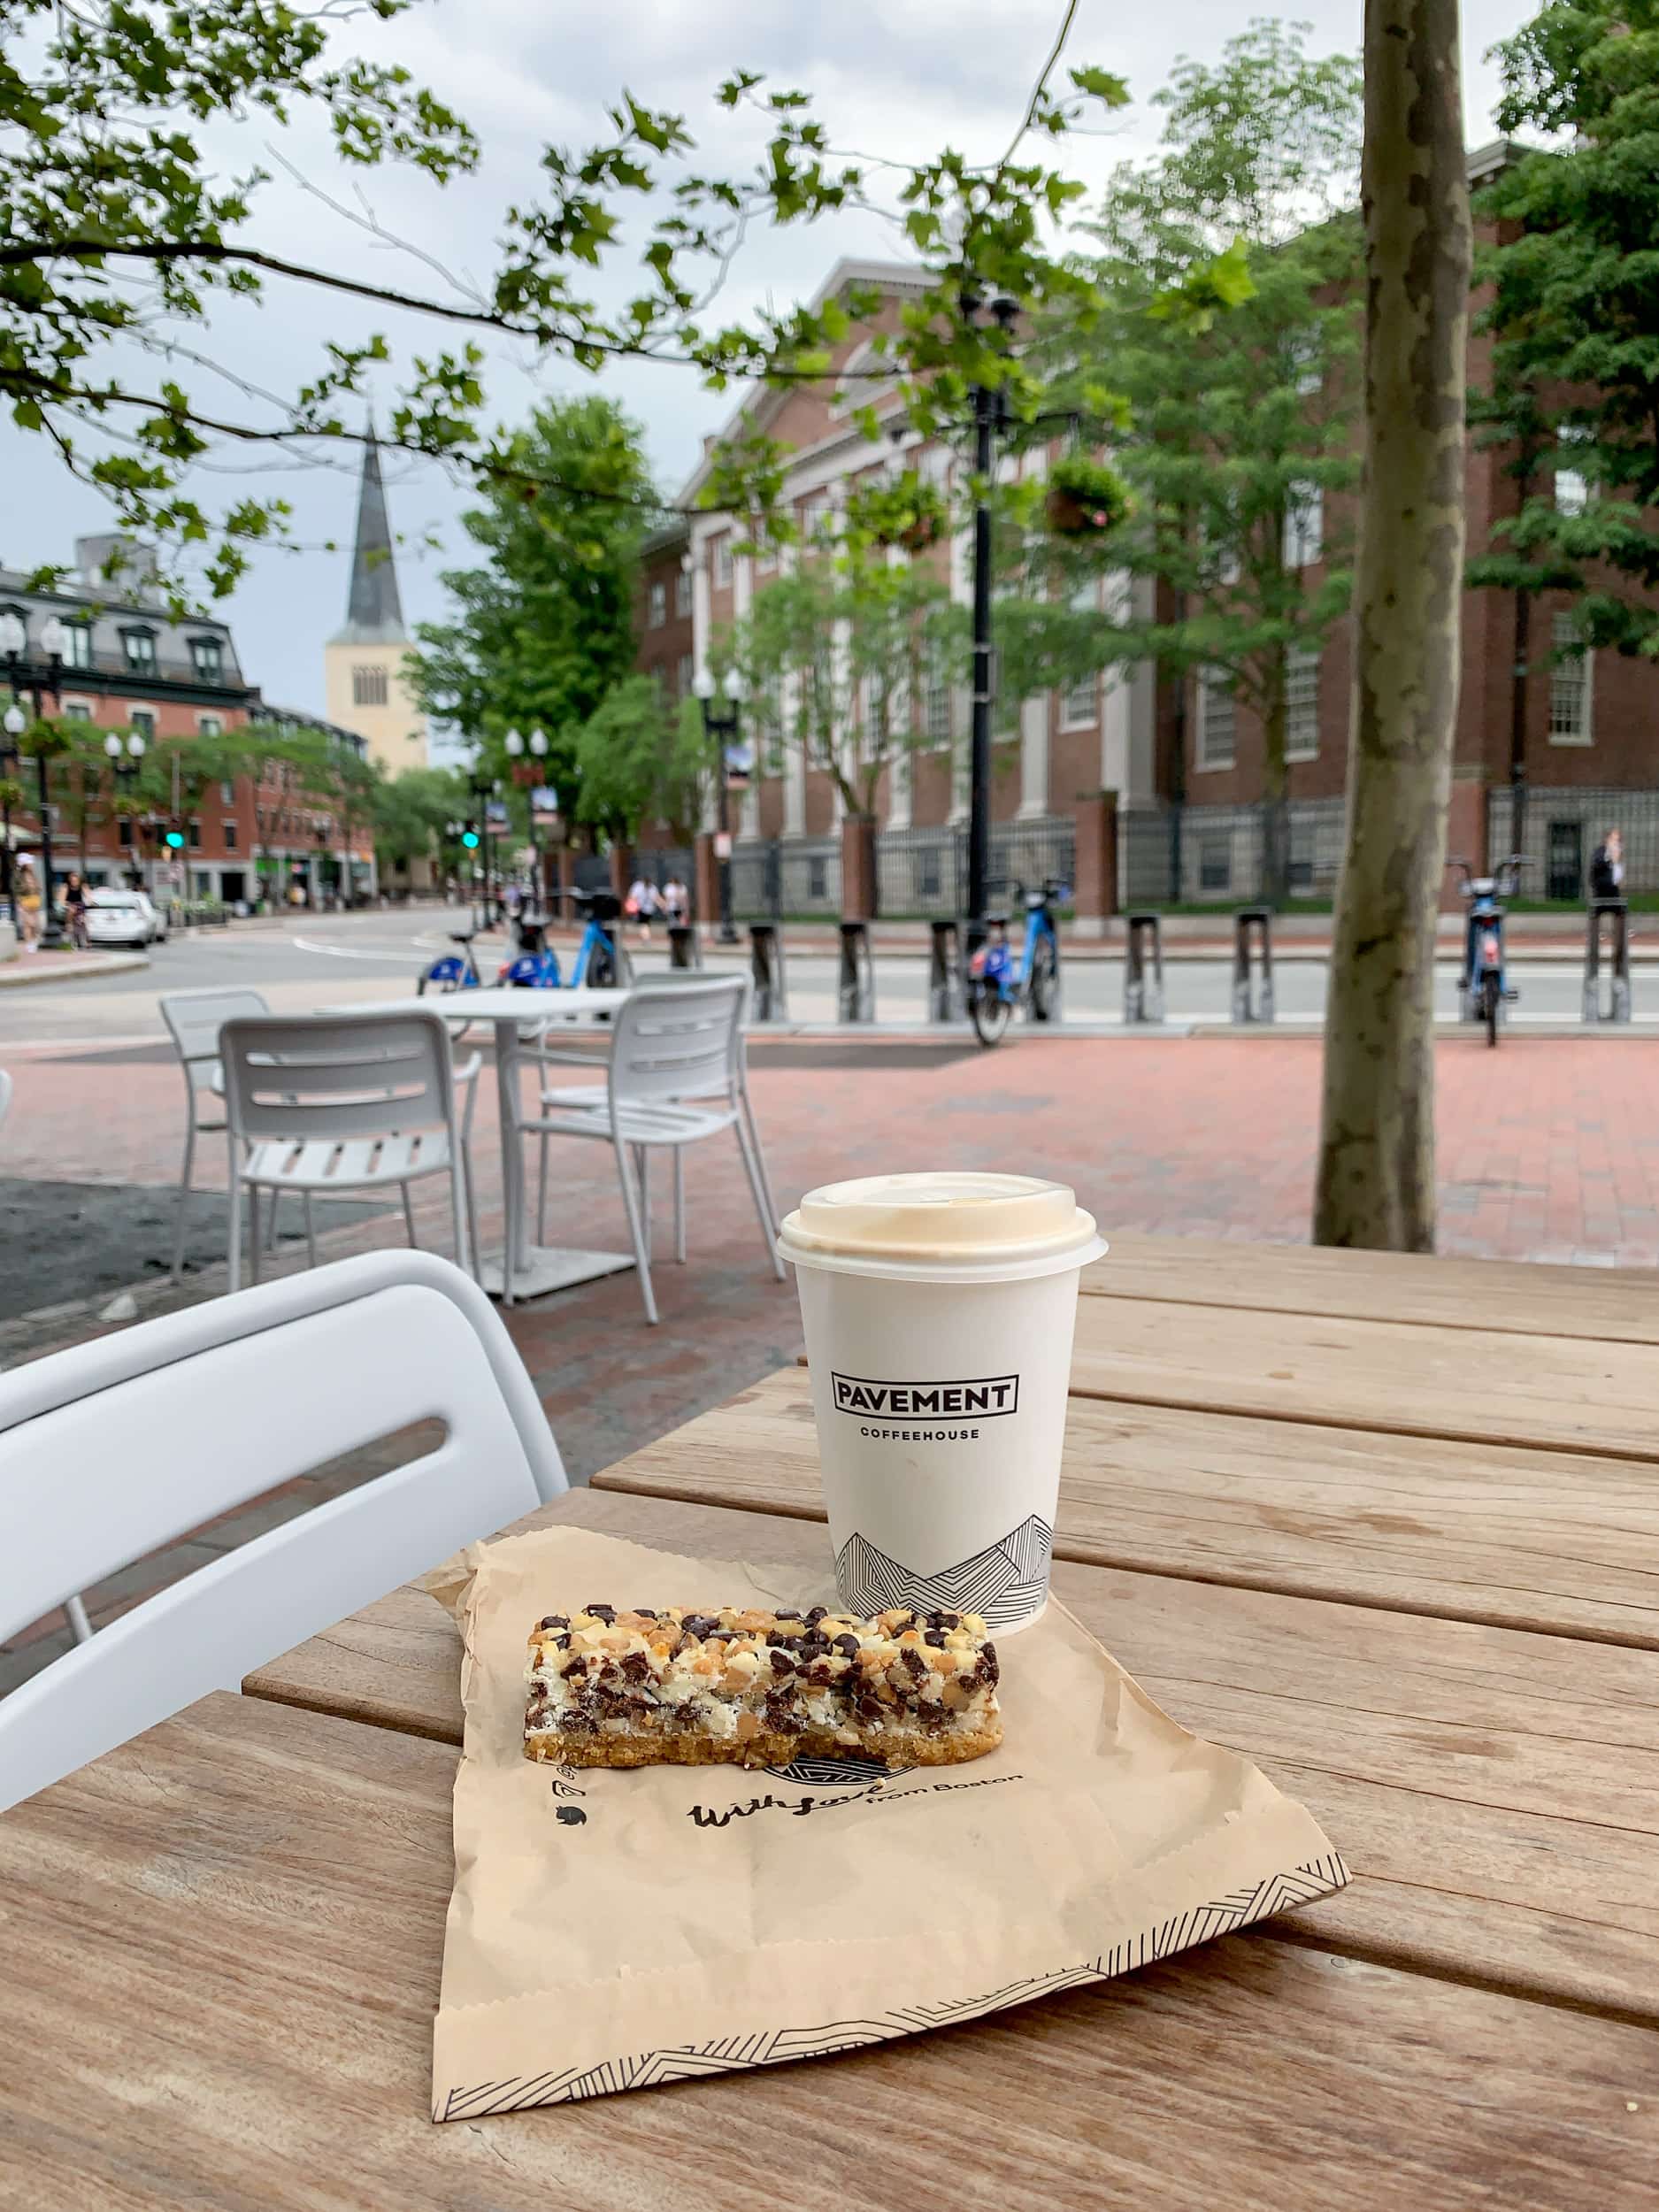 Pavement coffee and an everything bar in Boston's Harvard Square